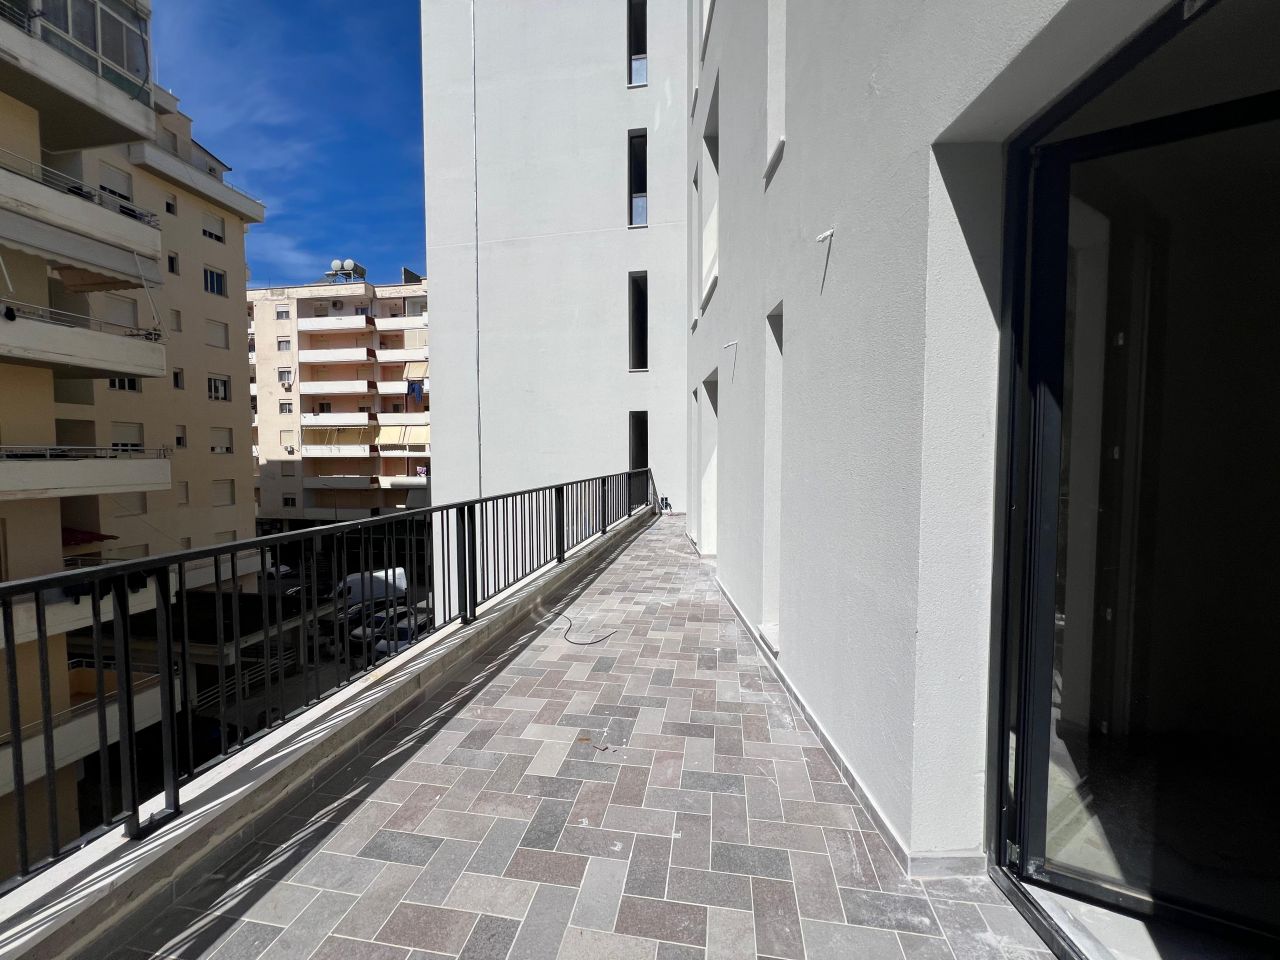  Apartment For Sale In Vlore Albania In A New Building, Just A Few Steps Away From The Beach